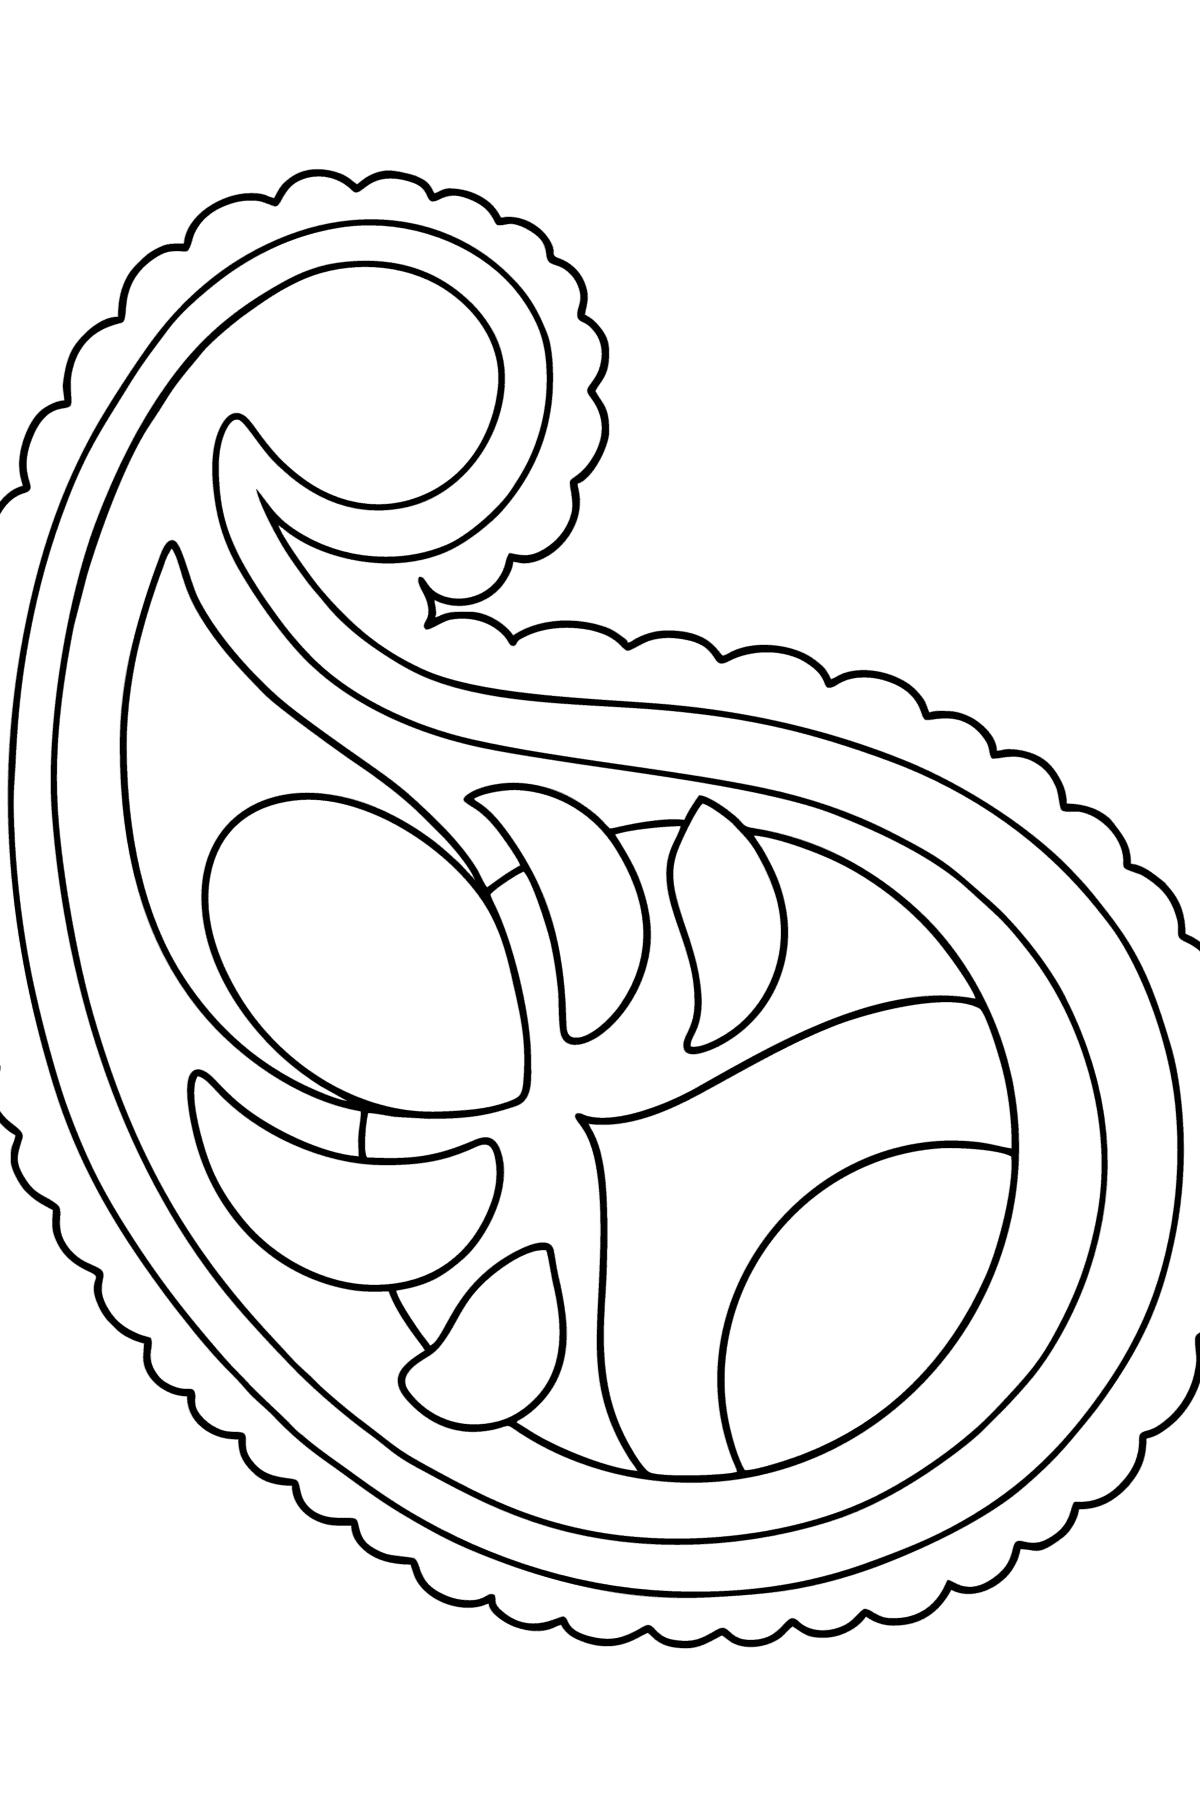 Paisley for Kids coloring page - Coloring Pages for Kids